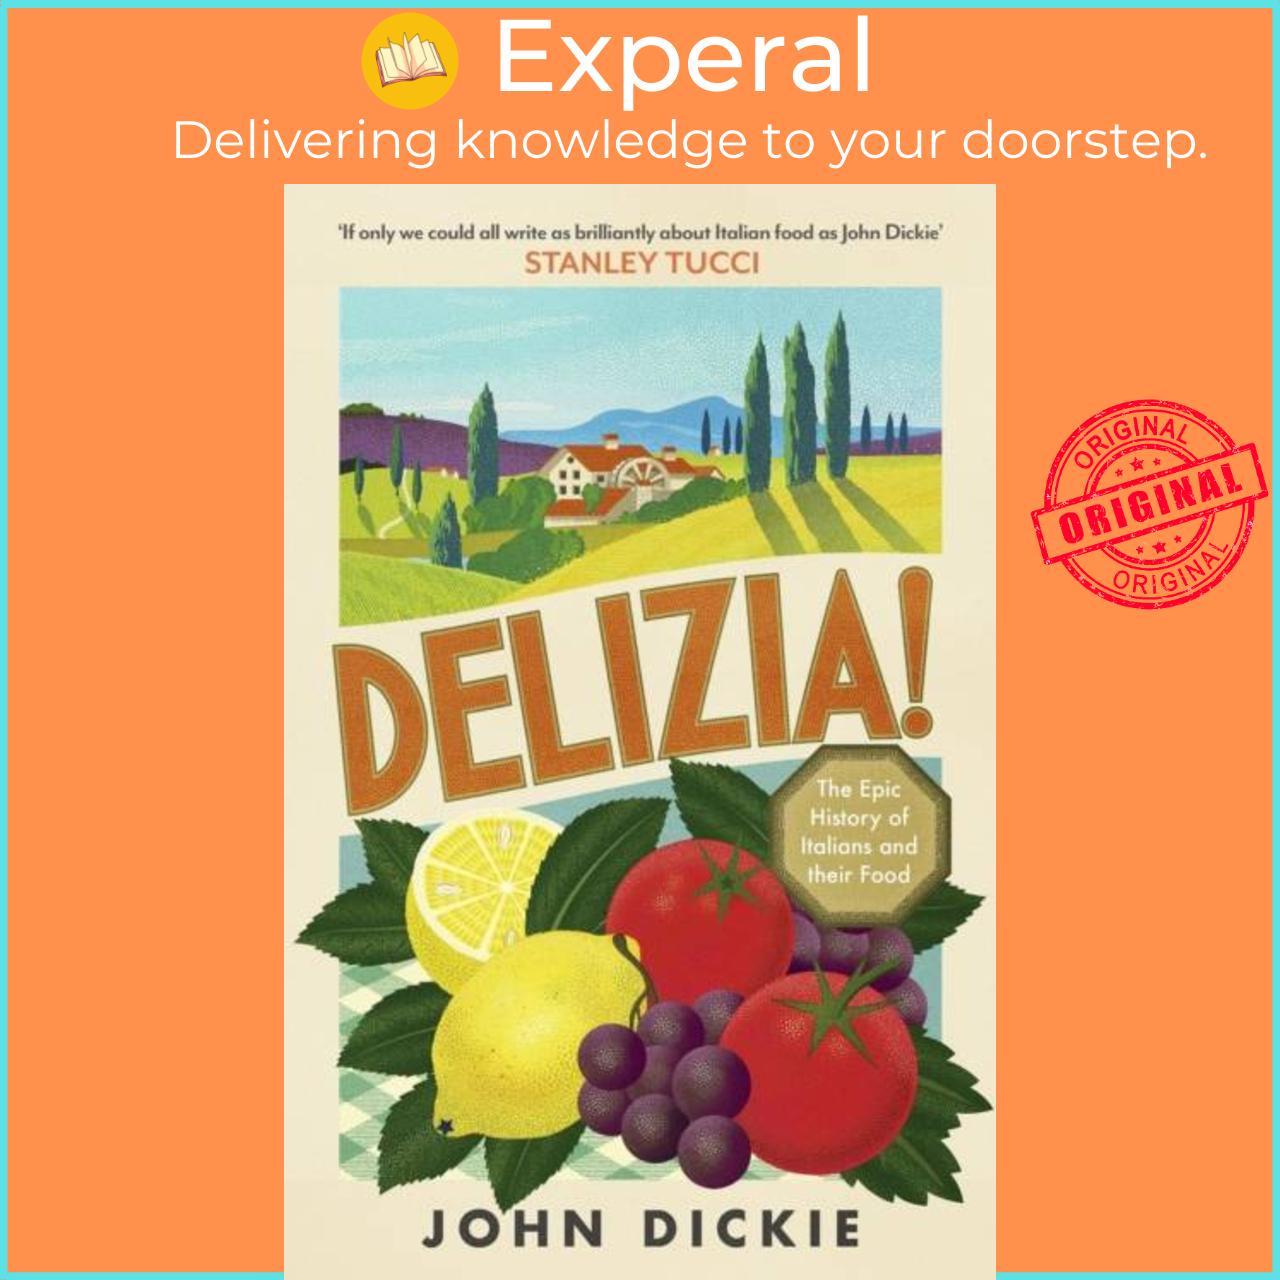 Sách - Delizia - The Epic History of Italians and Their Food by John Dickie (UK edition, hardcover)